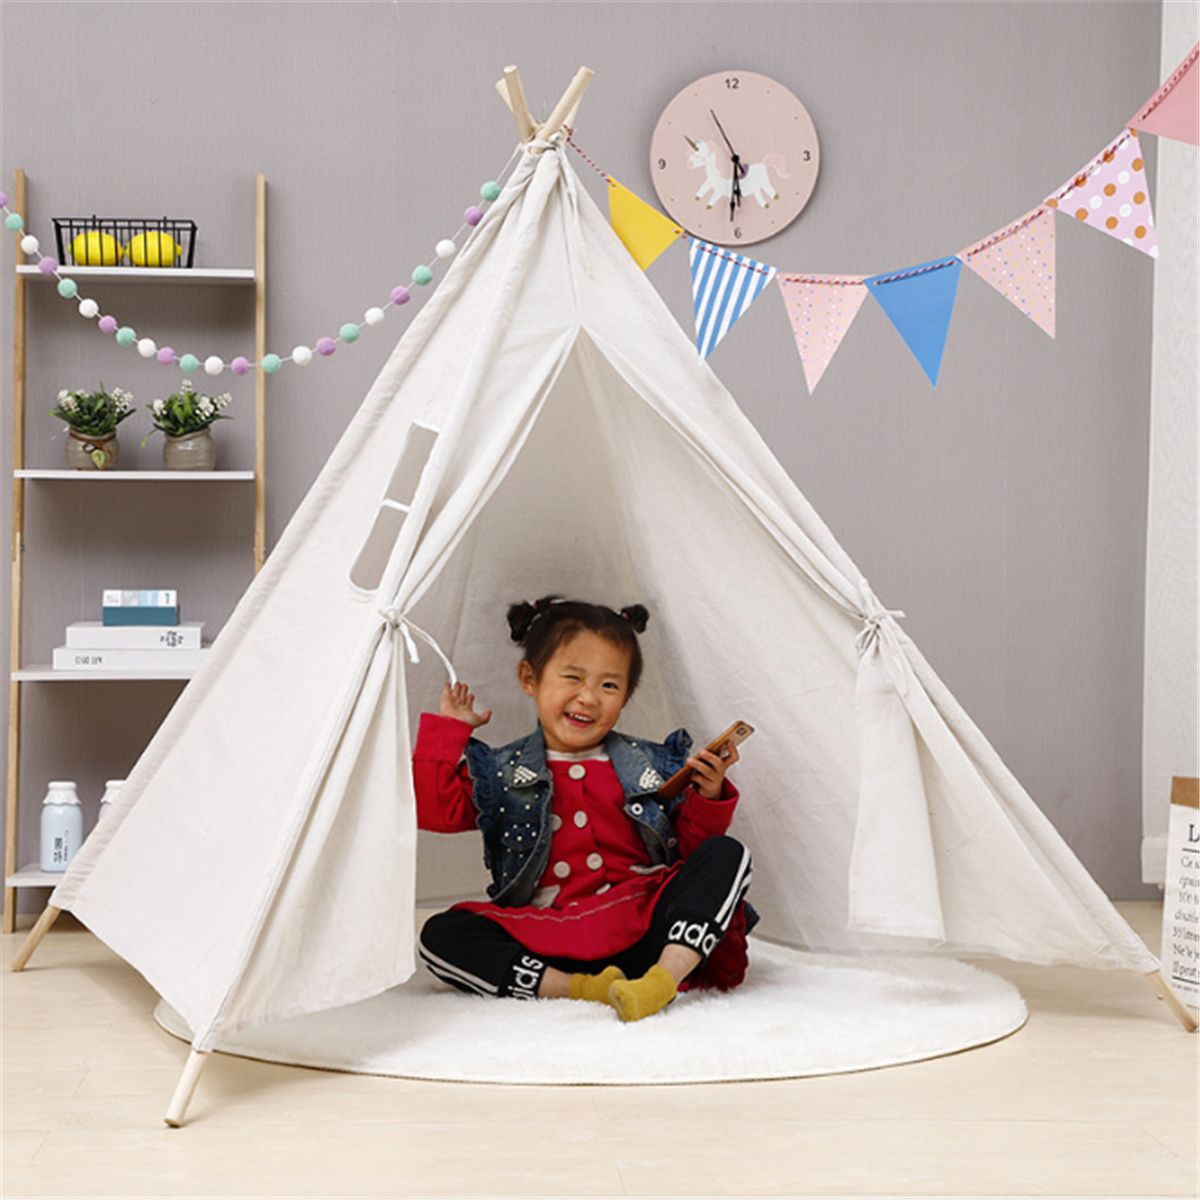 Large-Cotton-Wood-Kids-Teepee-Tent-Childrens-Wigwam-Indoor-Outdoor-Play-House-1545772